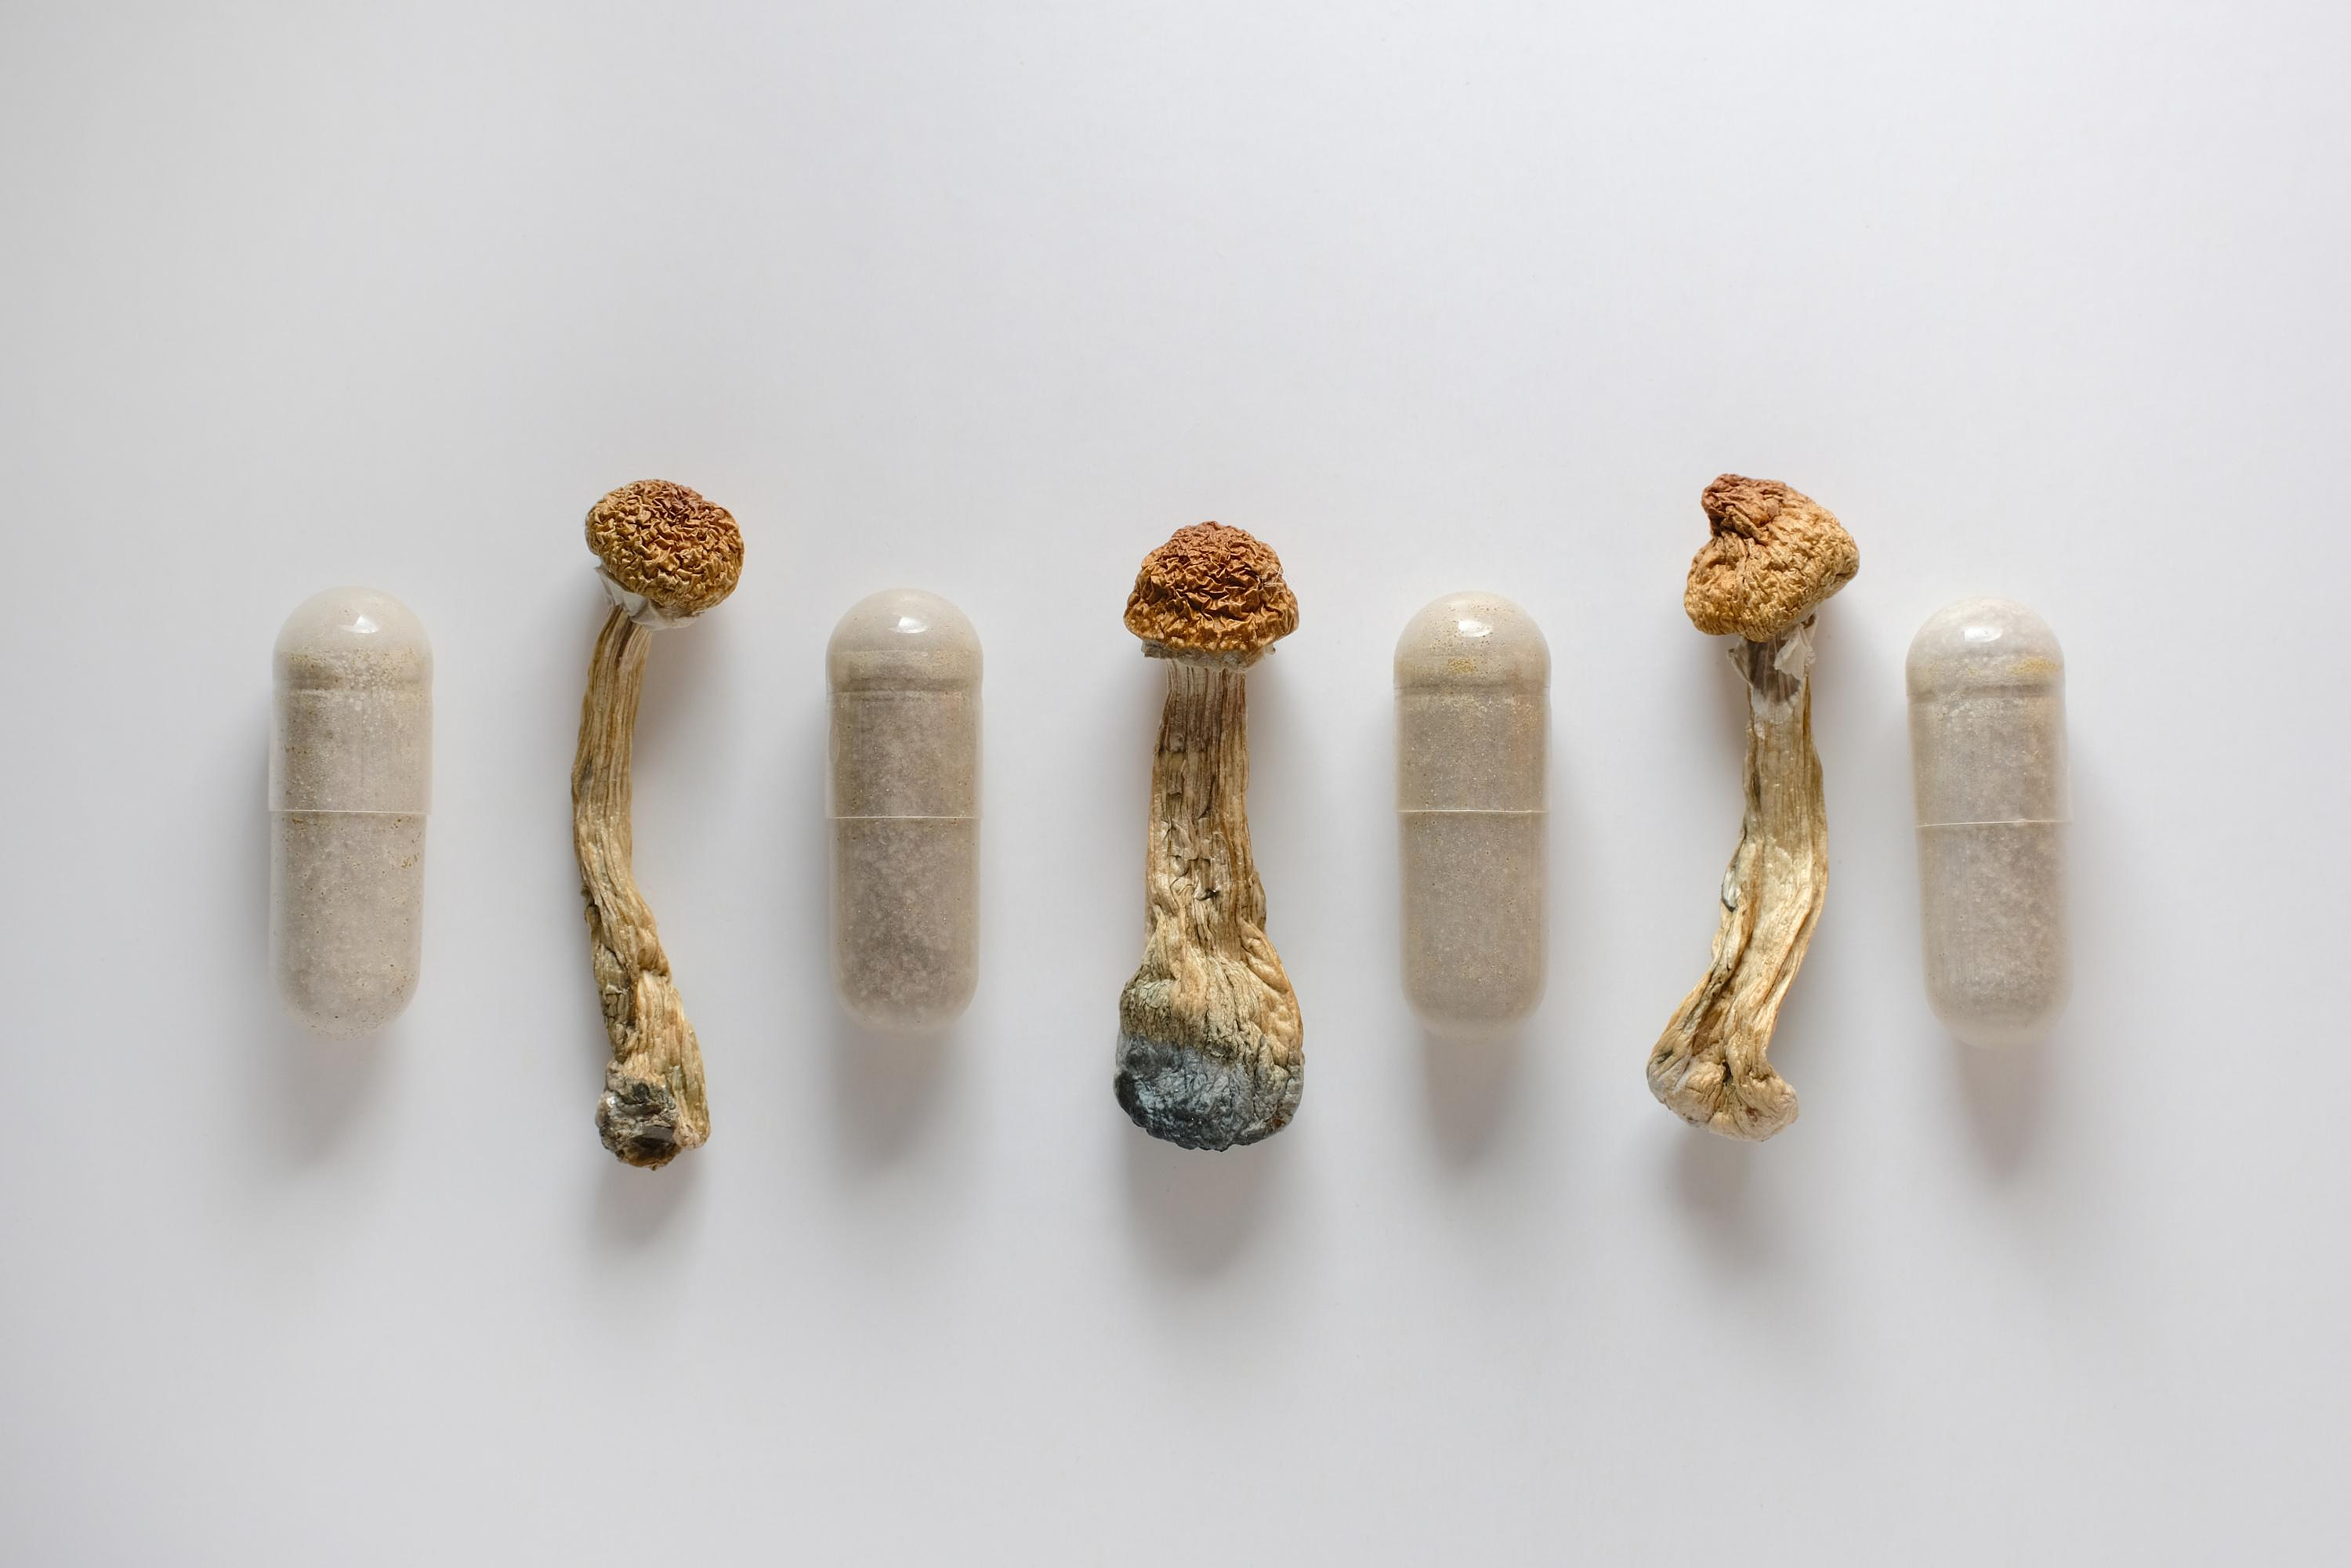 Hallucinogenic mushrooms: a first experiment carried out in France with psilocybin